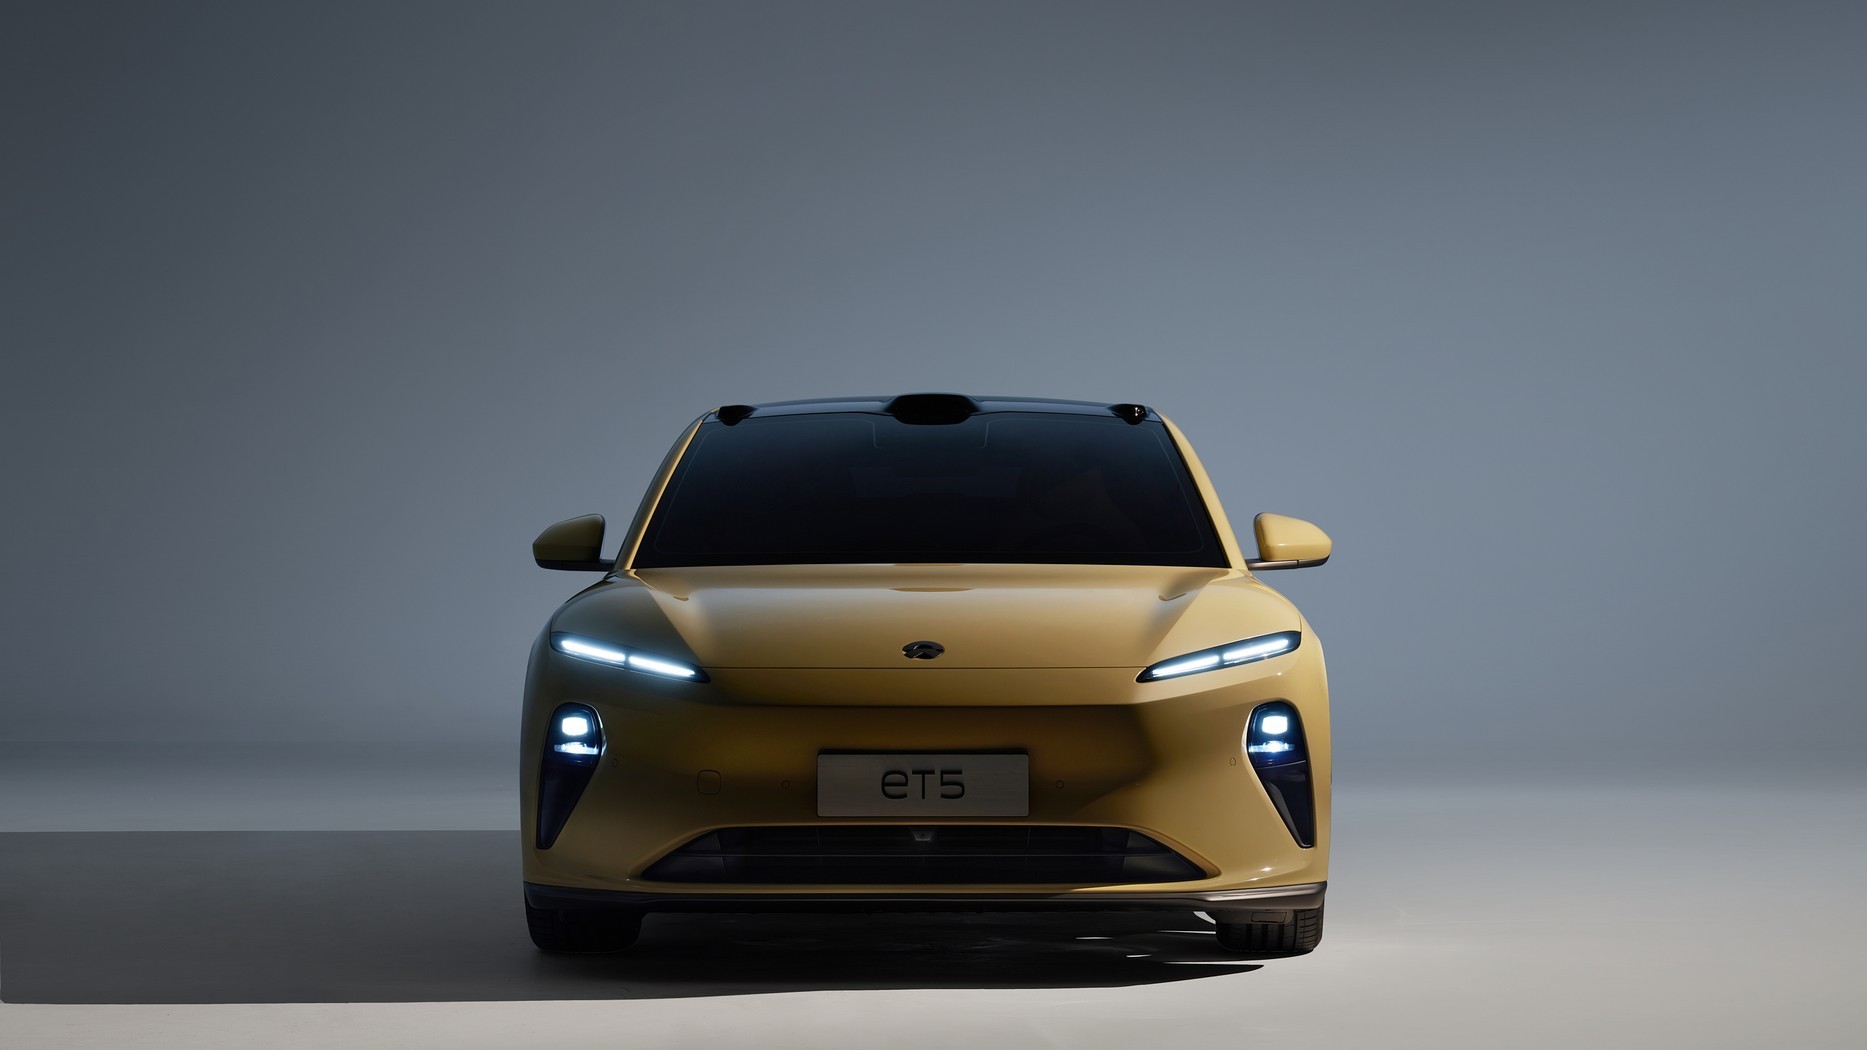 NIO ET5 1 - China new energy vehicles (NEV) sales reached 3.3 million units in 2021